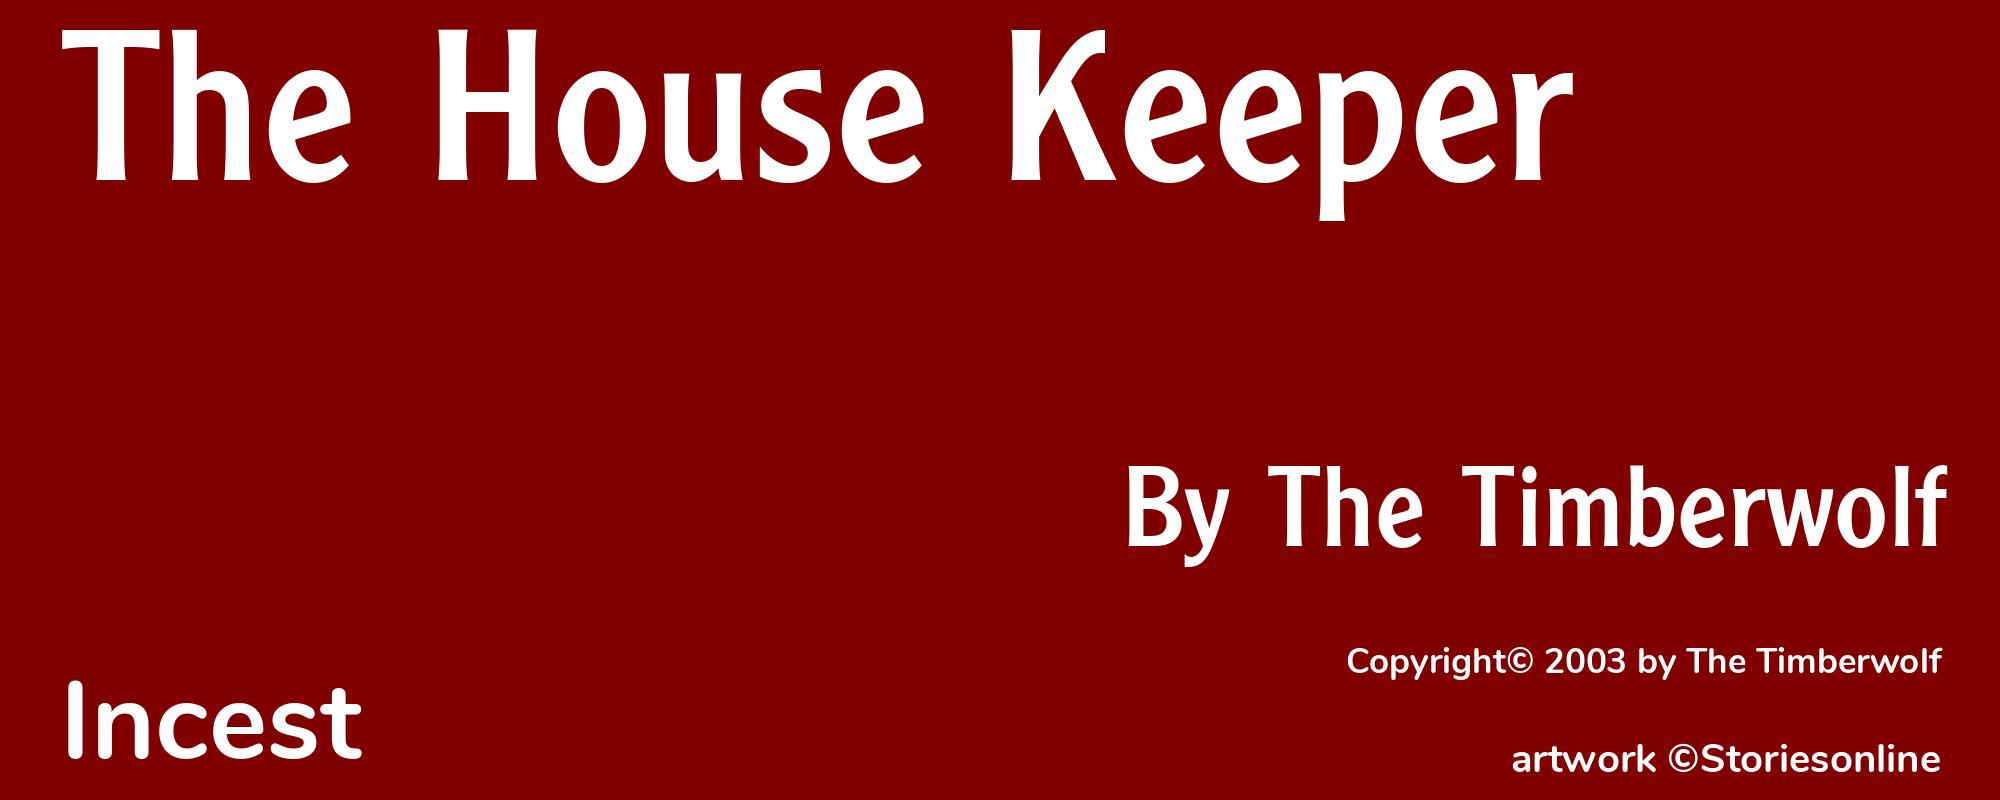 The House Keeper - Cover